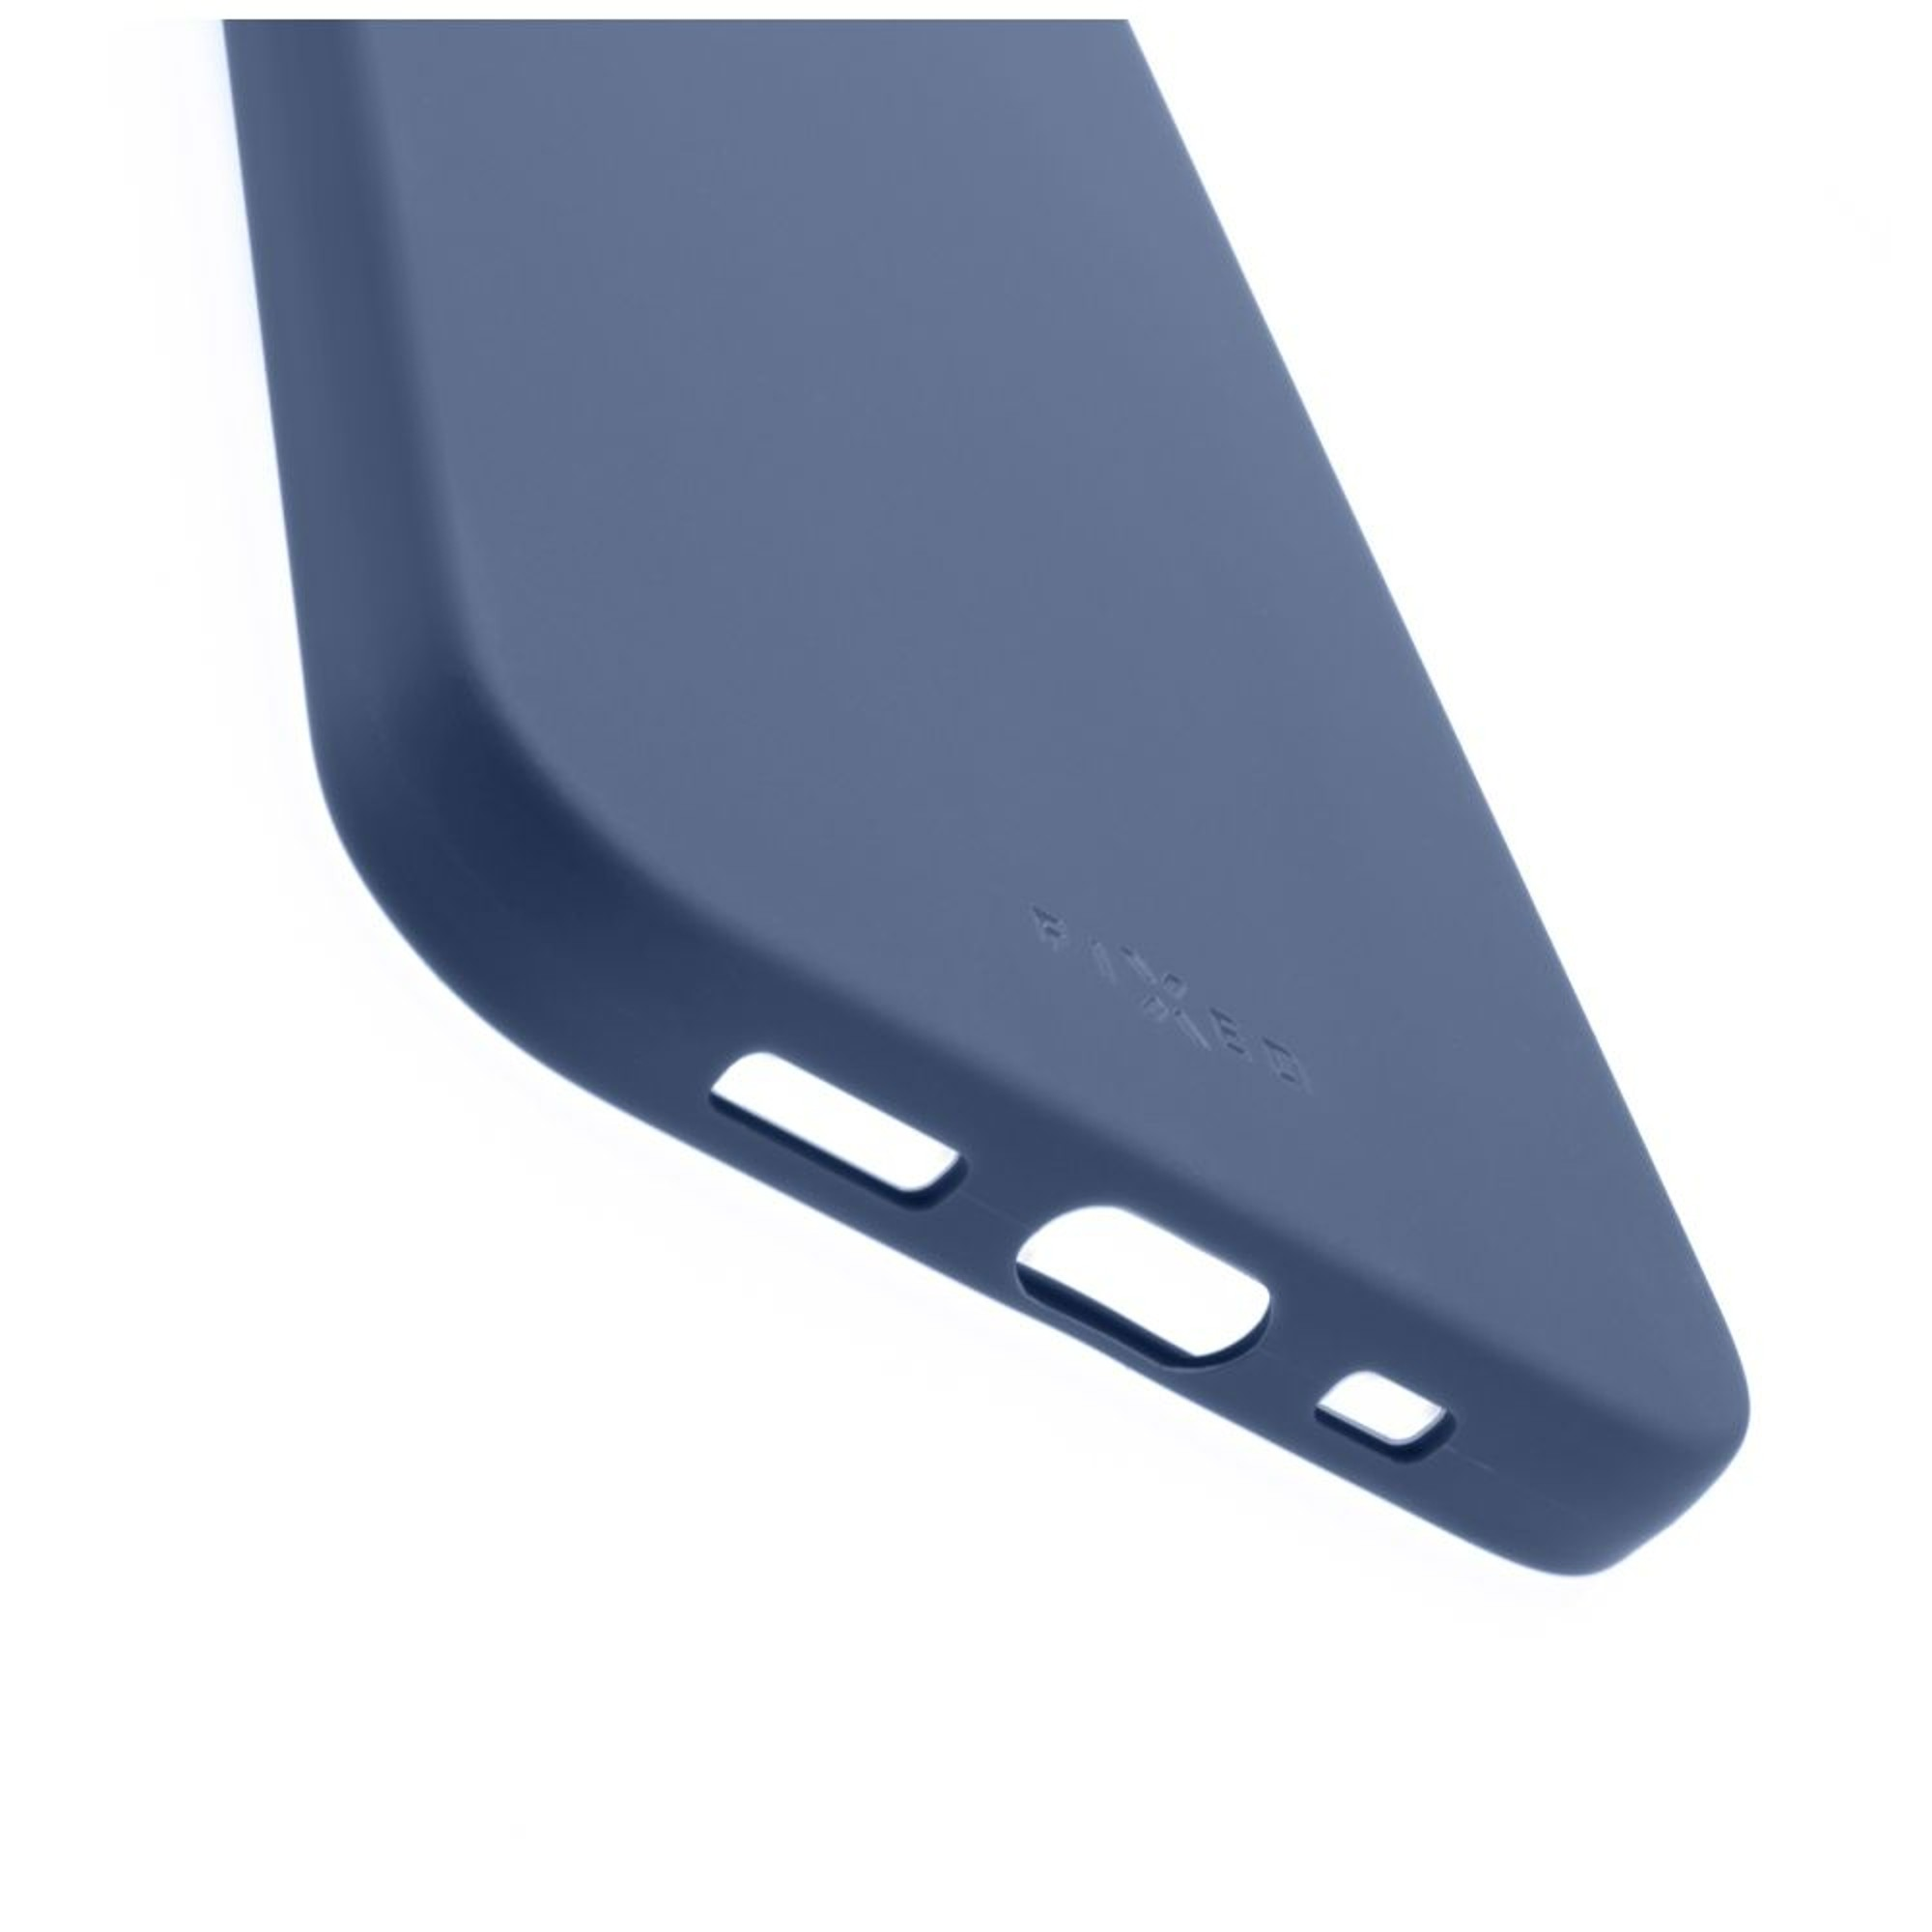 FIXST-1097-BL, Lite, Soft-Touch Xiaomi, Backcover, Blau Story 13 FIXED